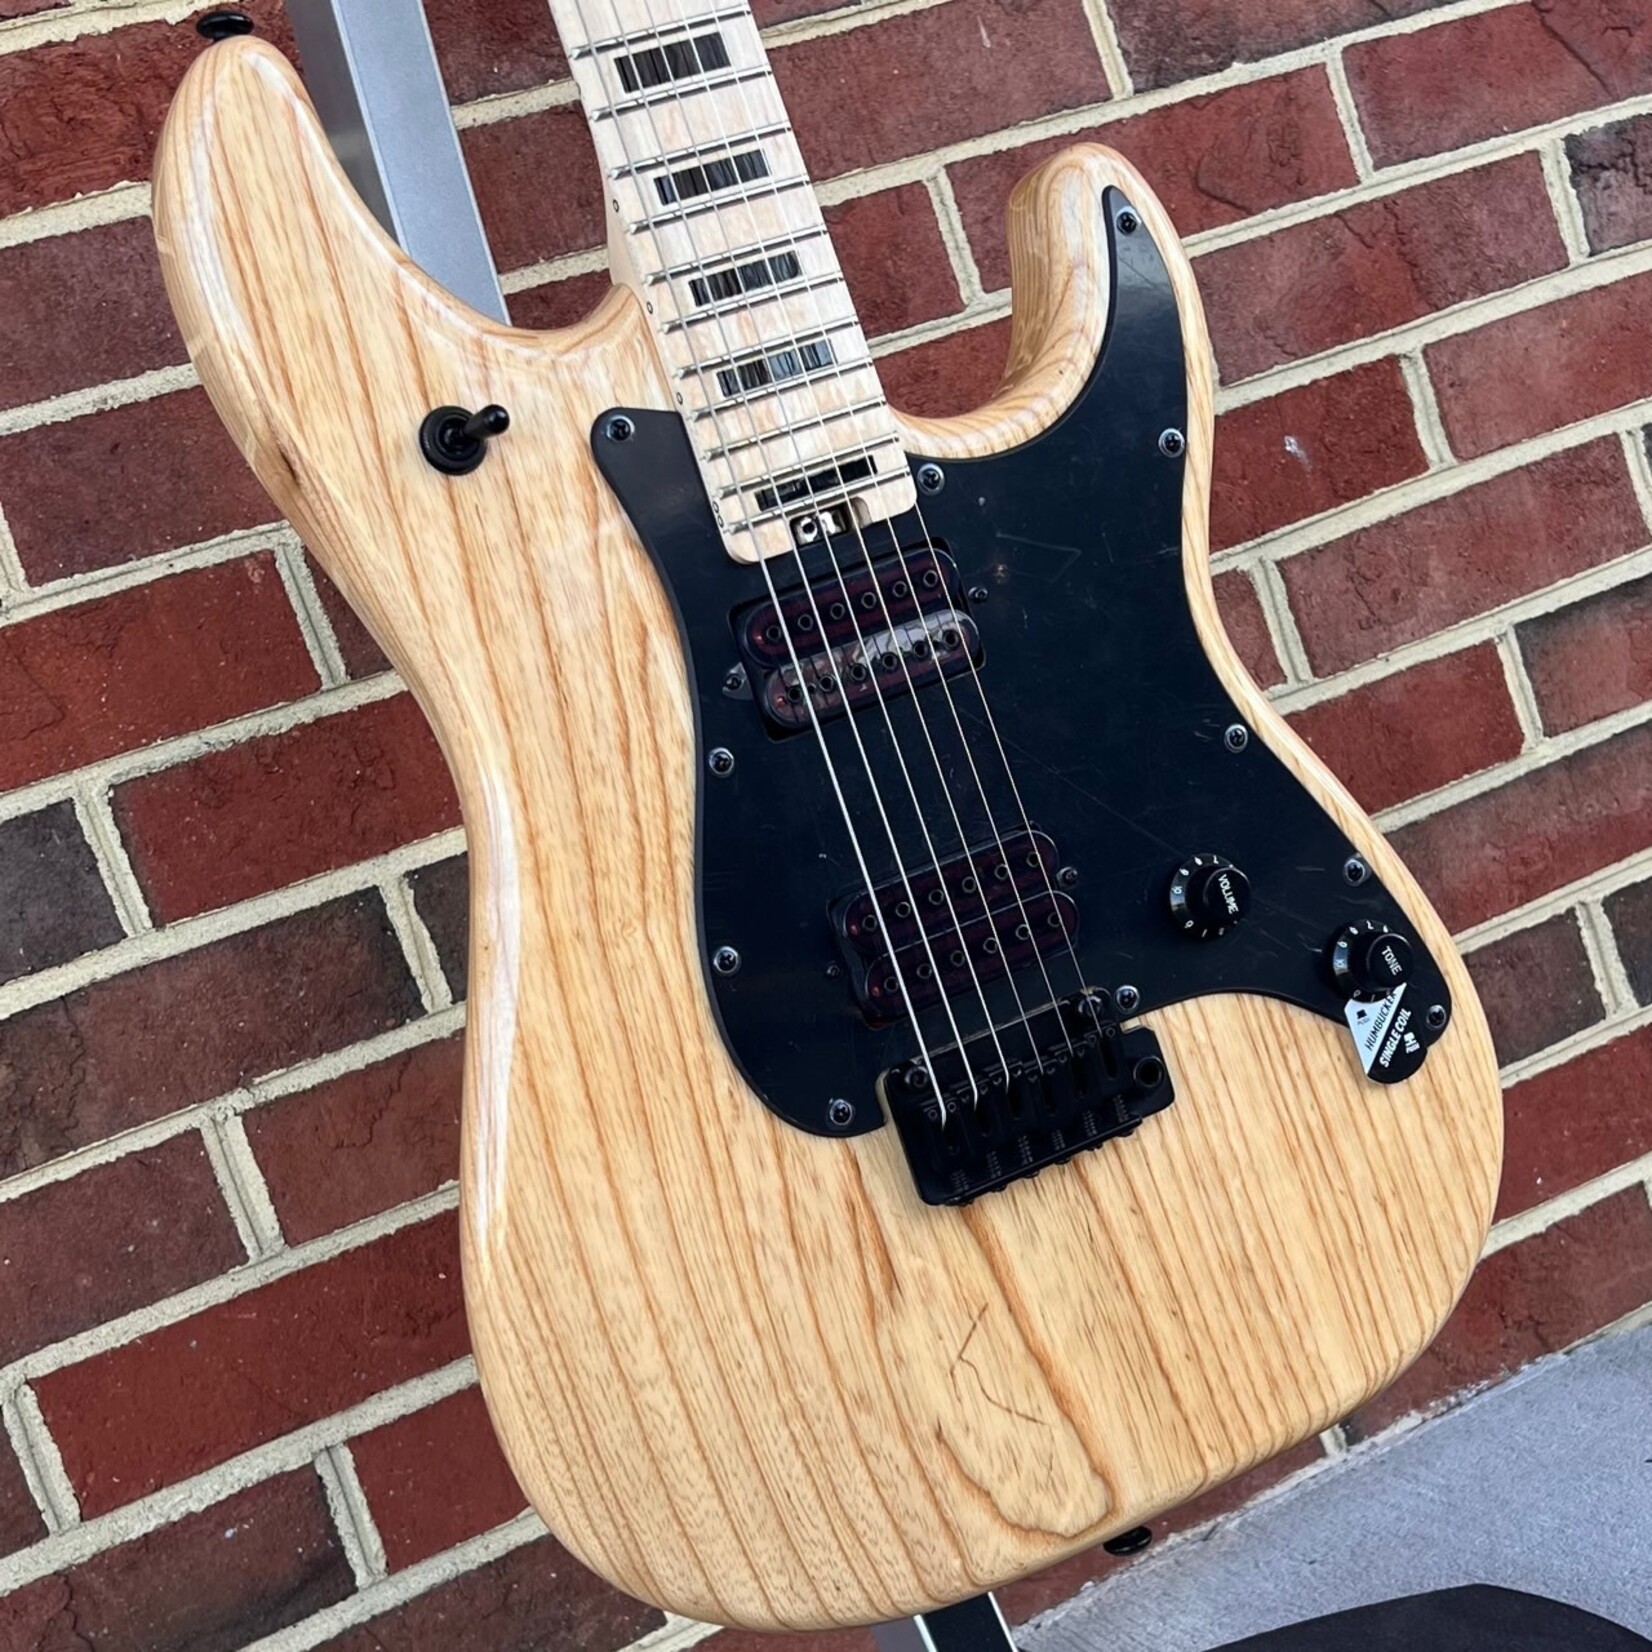 Schecter Guitar Research Schecter Justin Beck Ani, Gloss Natural, Swamp Ash Body, Maple Neck & Fretboard, Block Inlays, D'Addario Auto-Trim Locking Tuners, SN# IW23020444